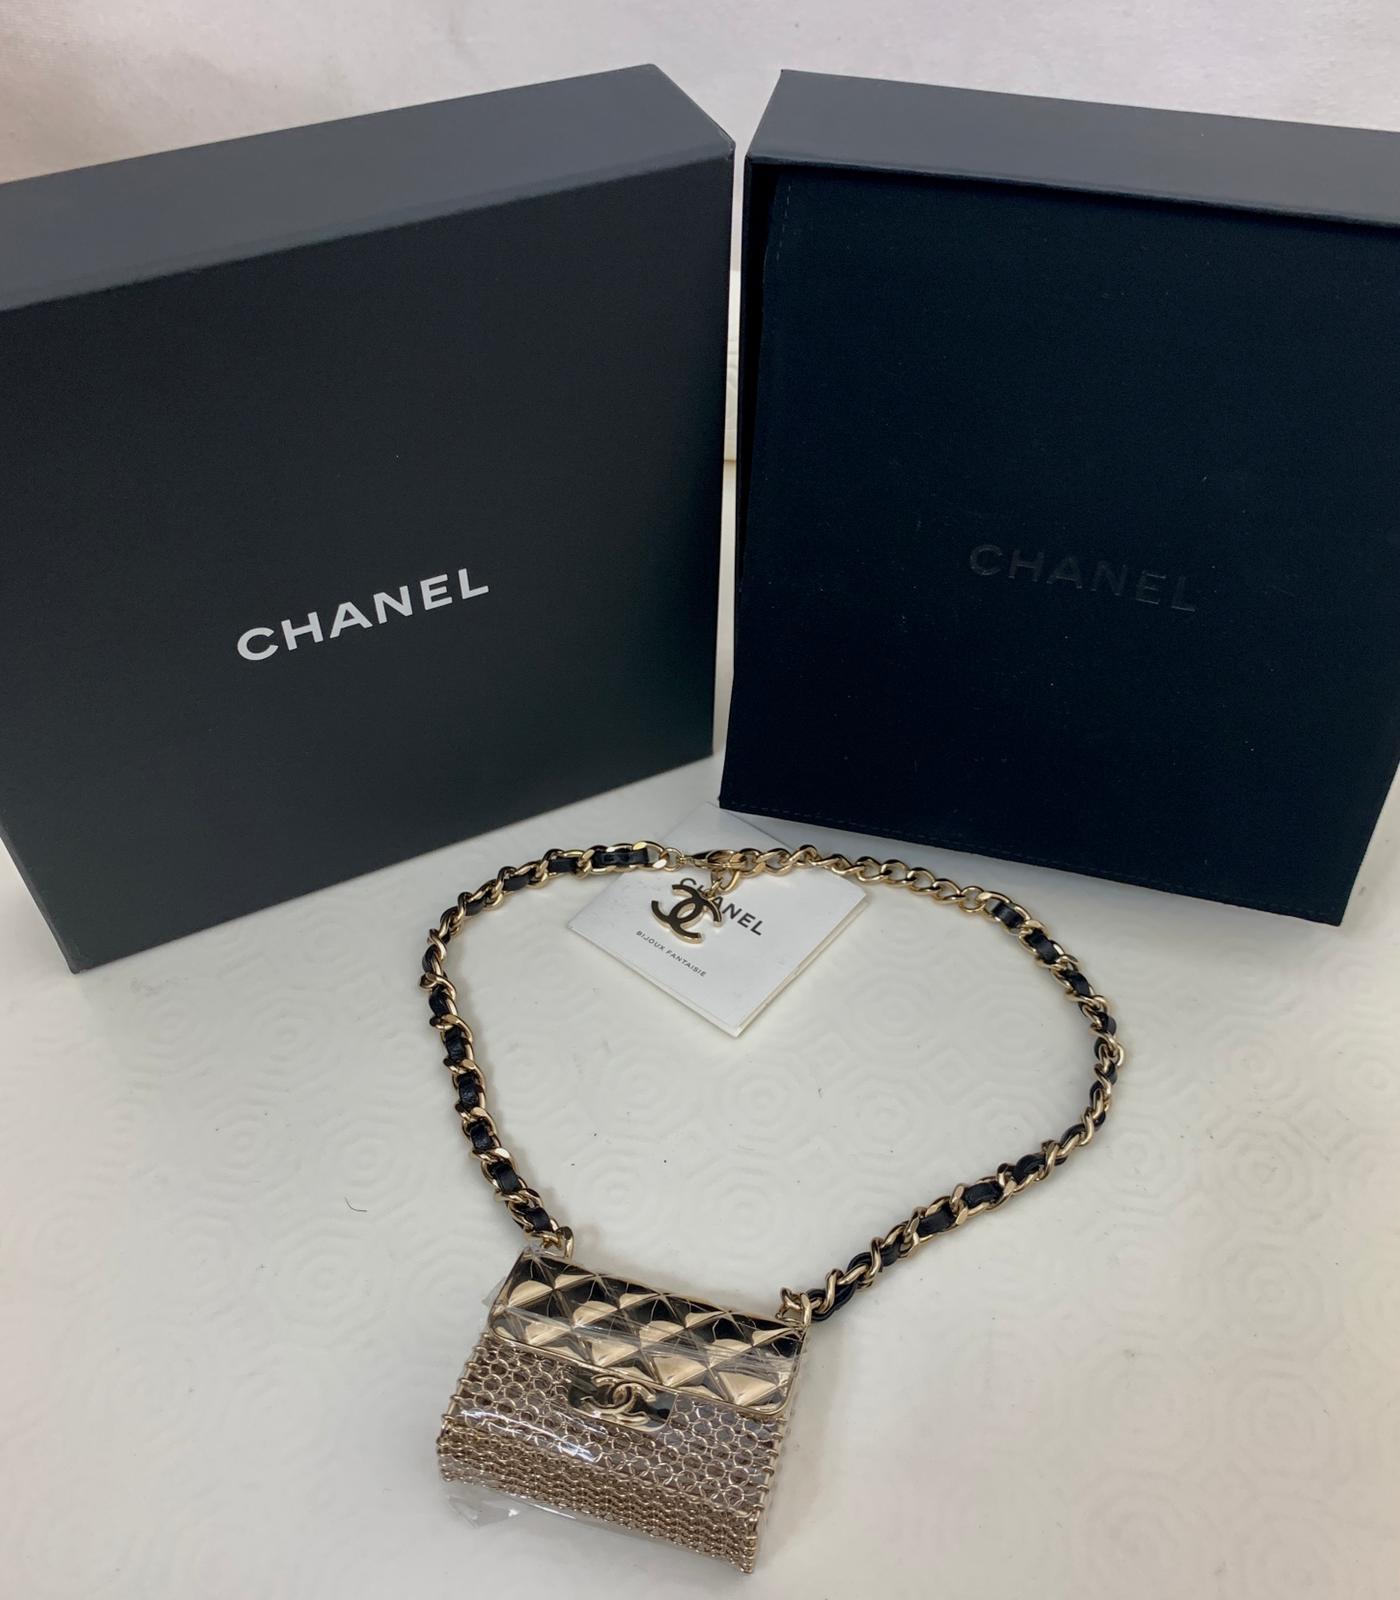 Chanel Mini Charms Bag Necklace In Excellent Condition For Sale In London, GB